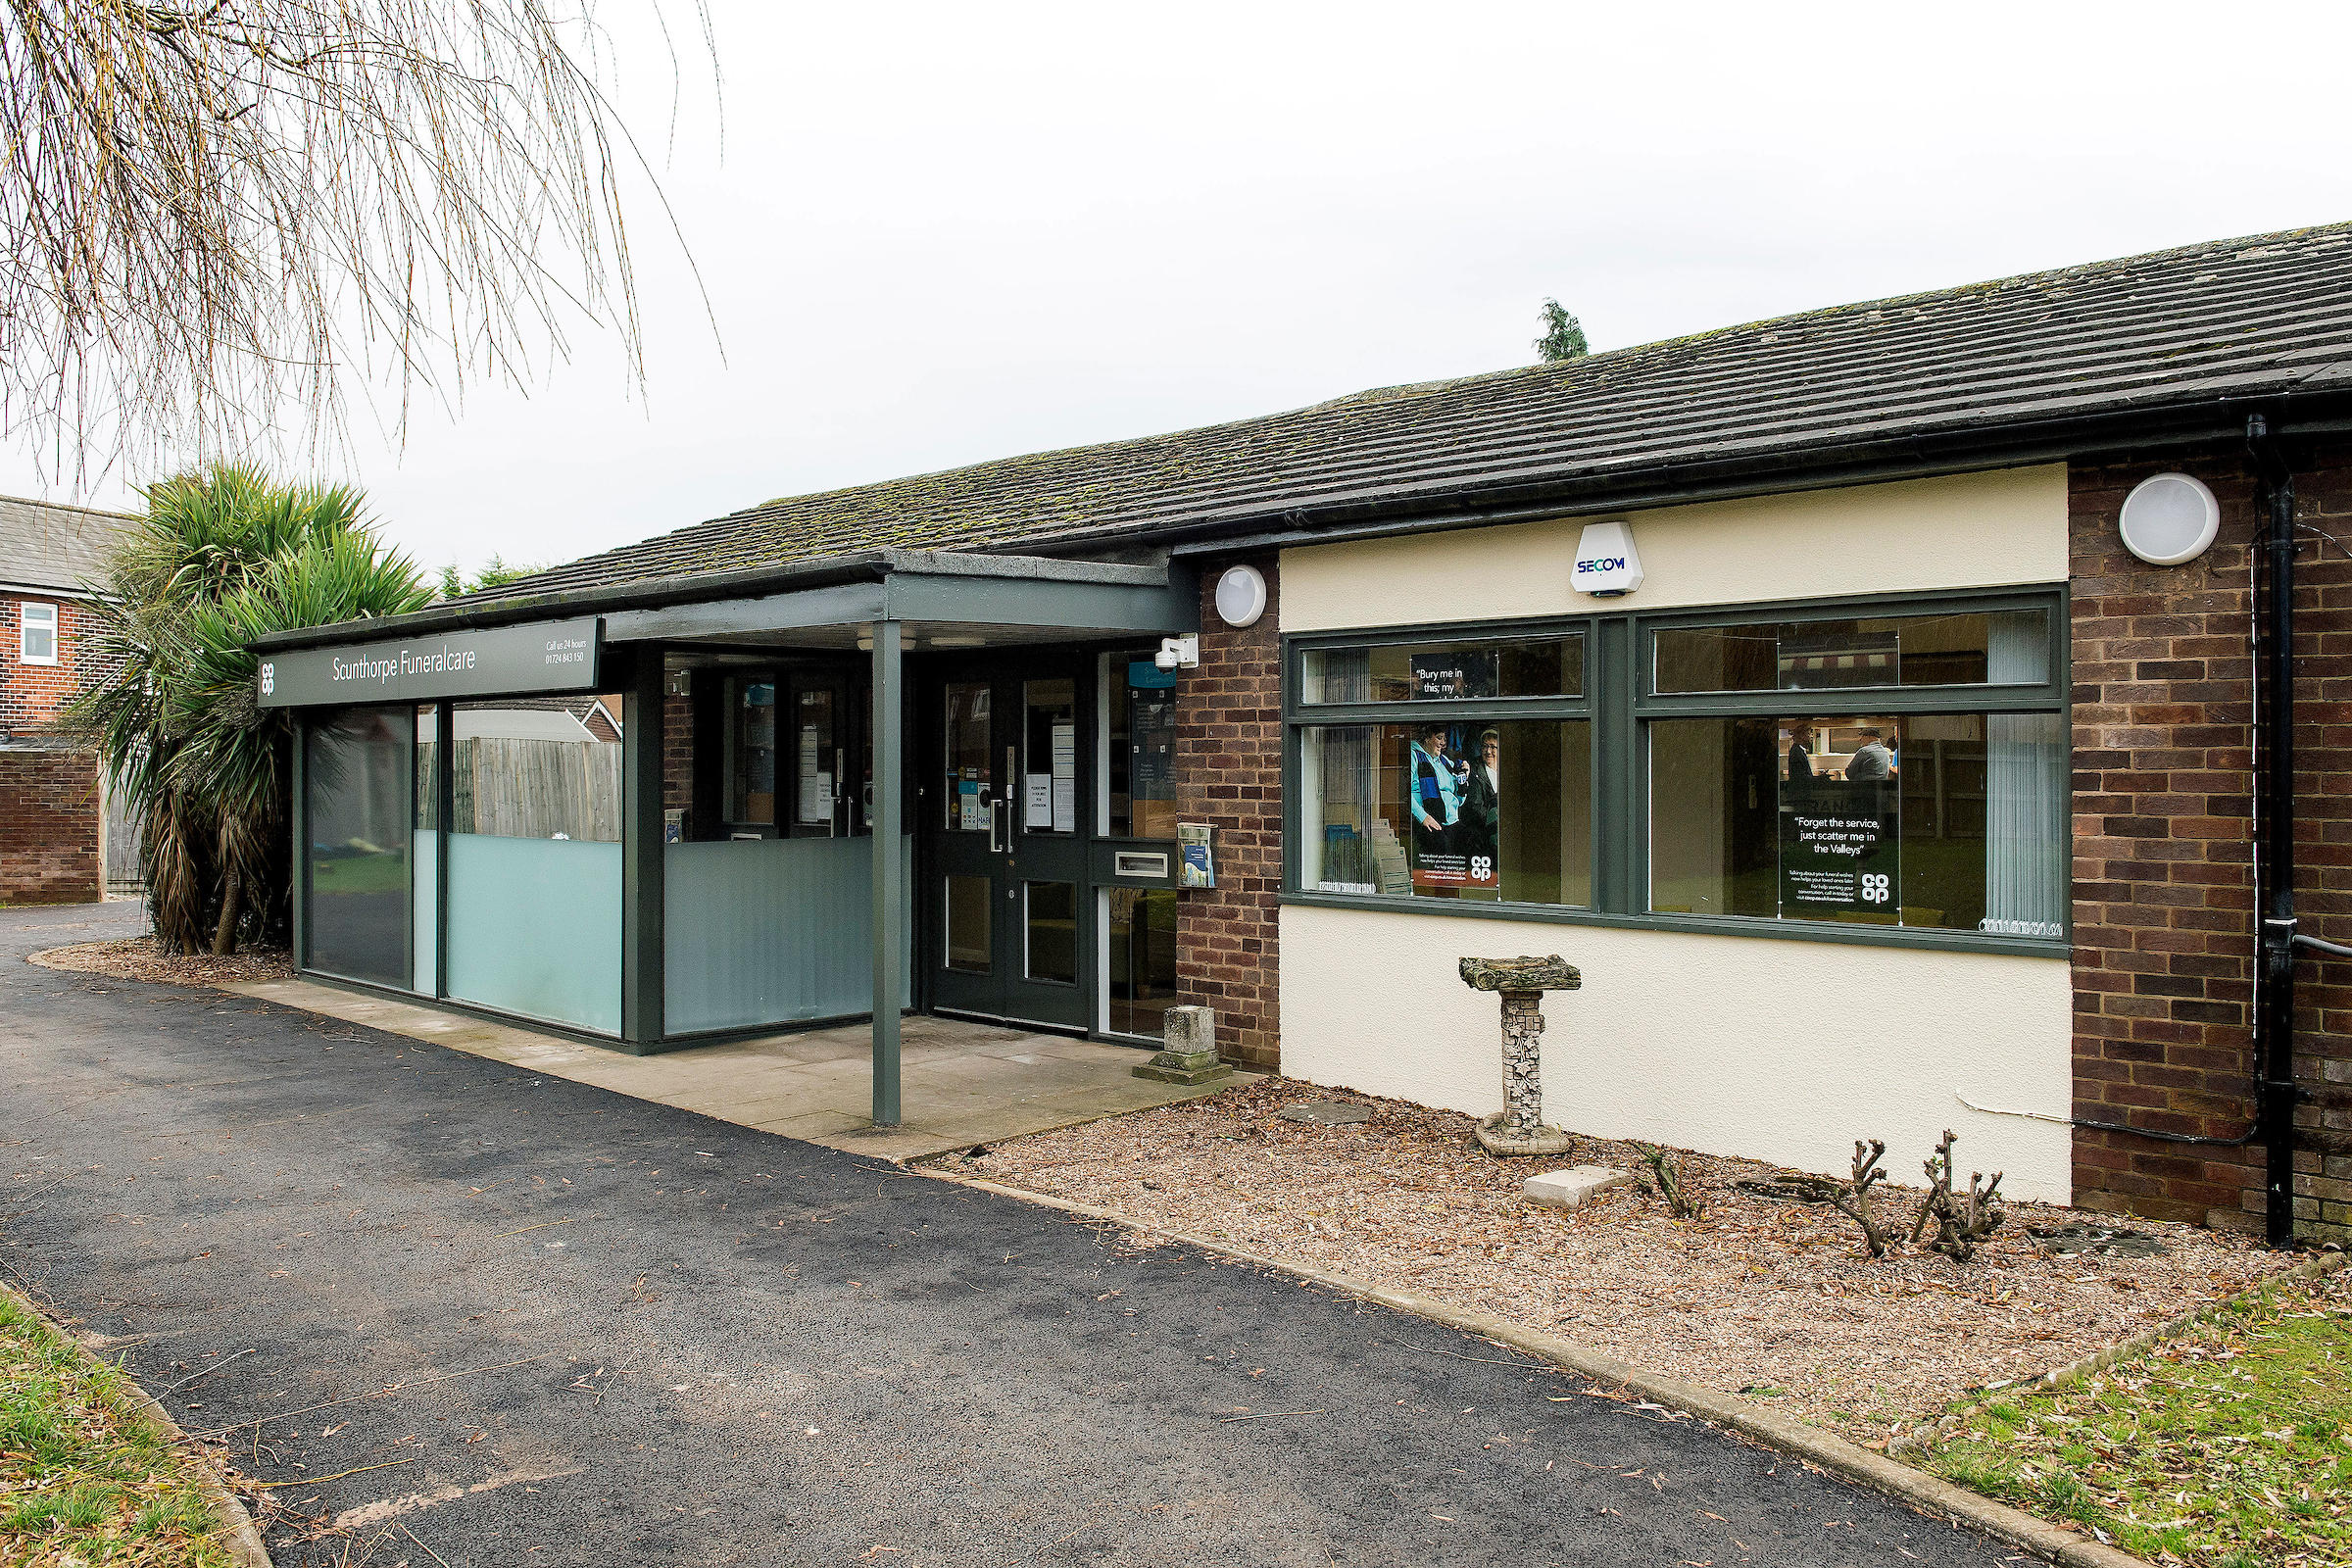 Images Co-op Funeralcare, Bottesford Road, Scunthorpe